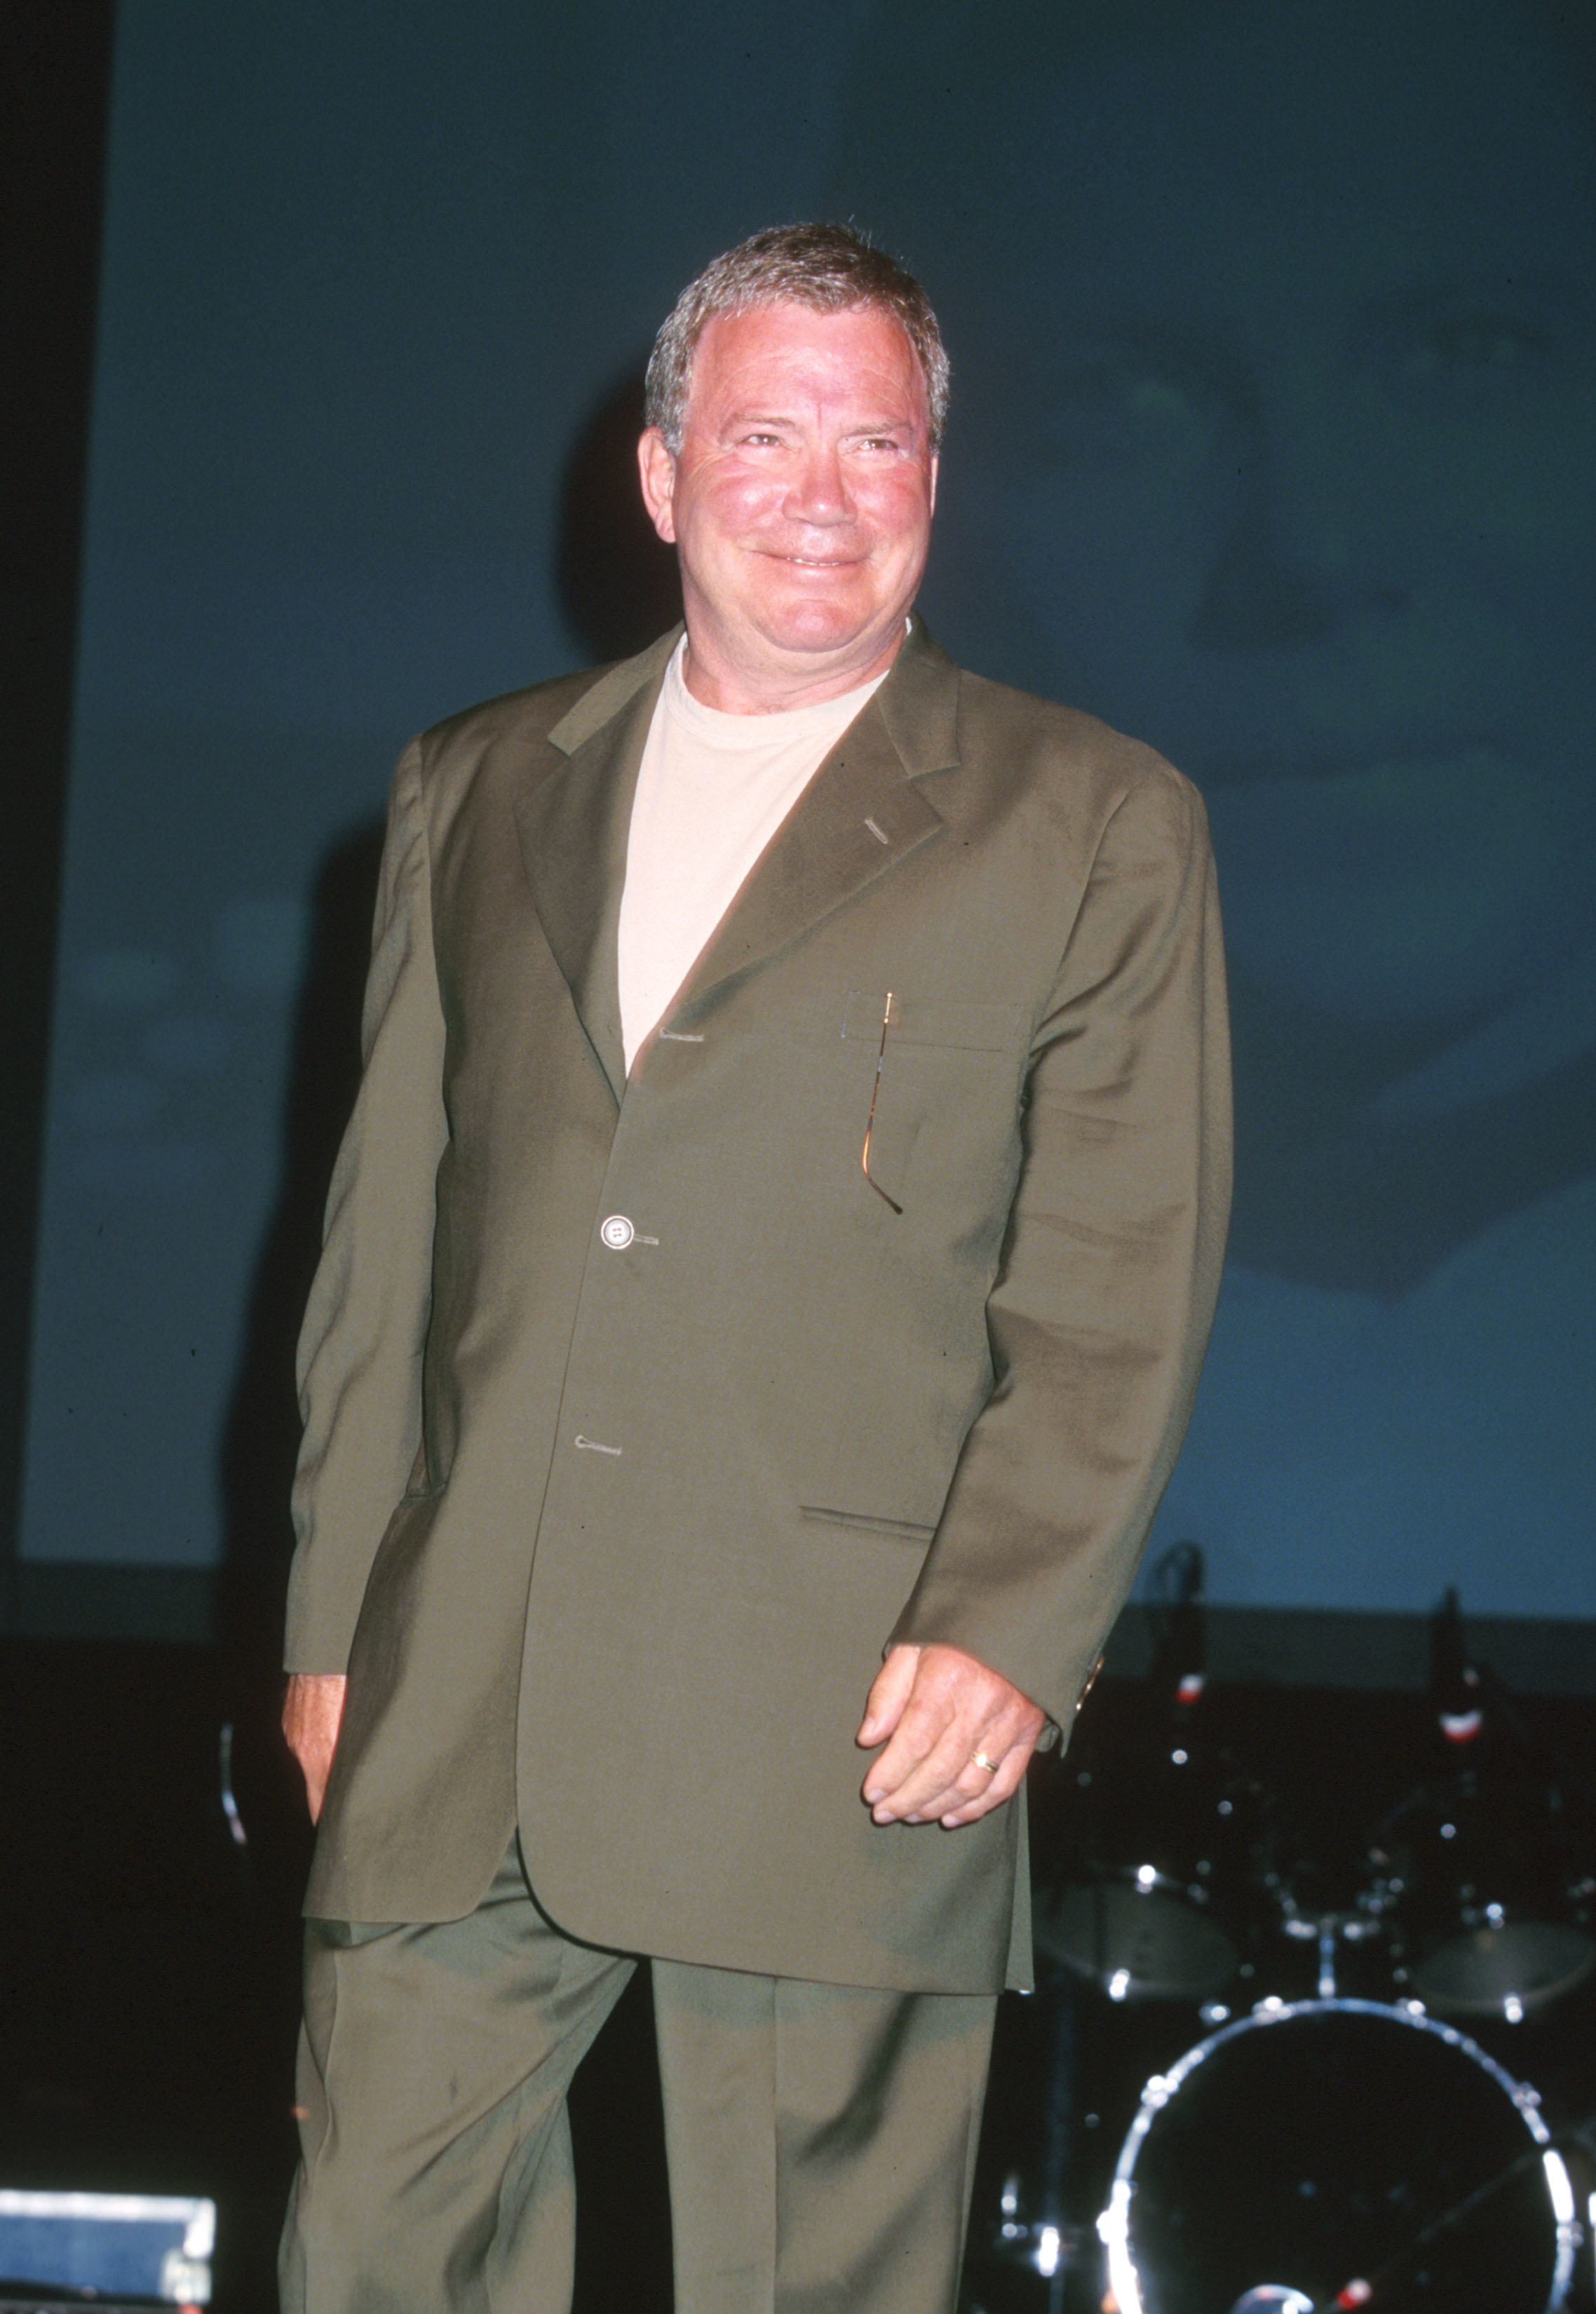 Man smiling in a formal olive suit poses for a photo at an event